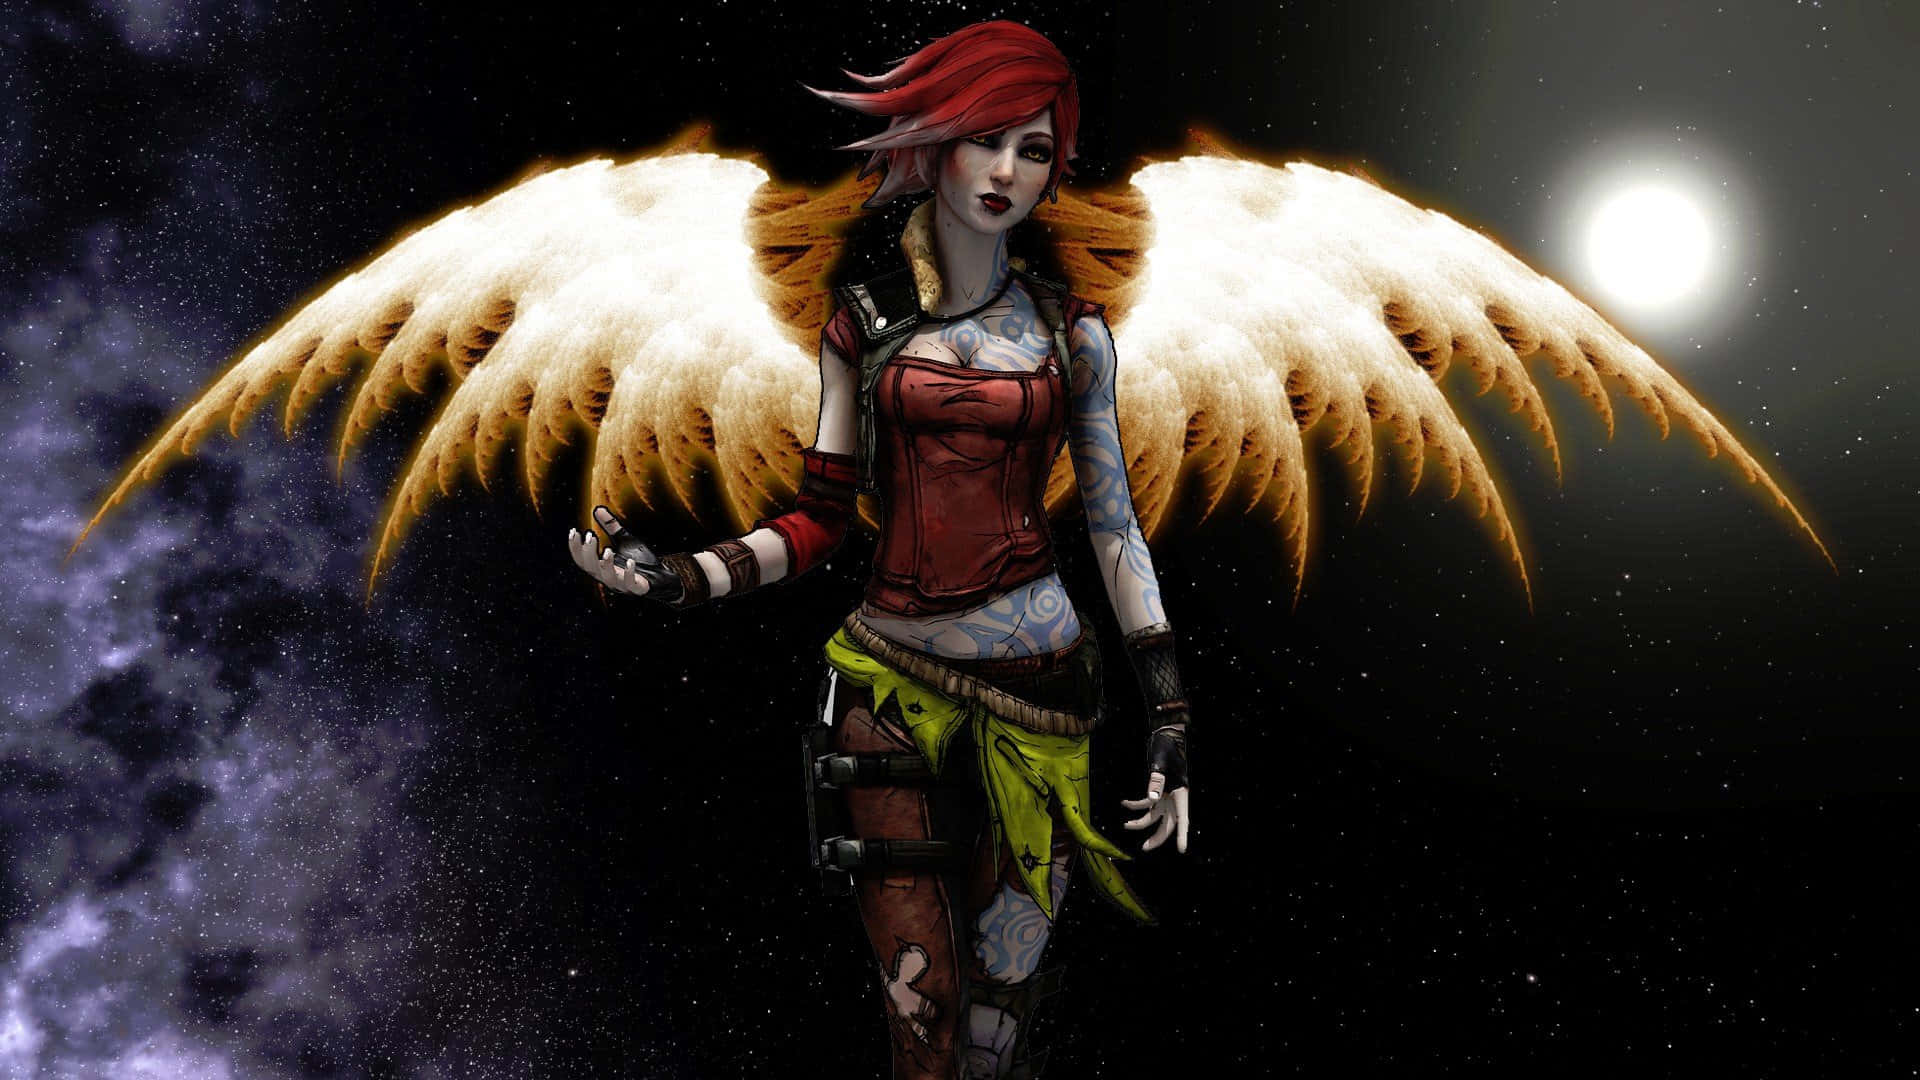 A Girl With Wings Standing In The Dark